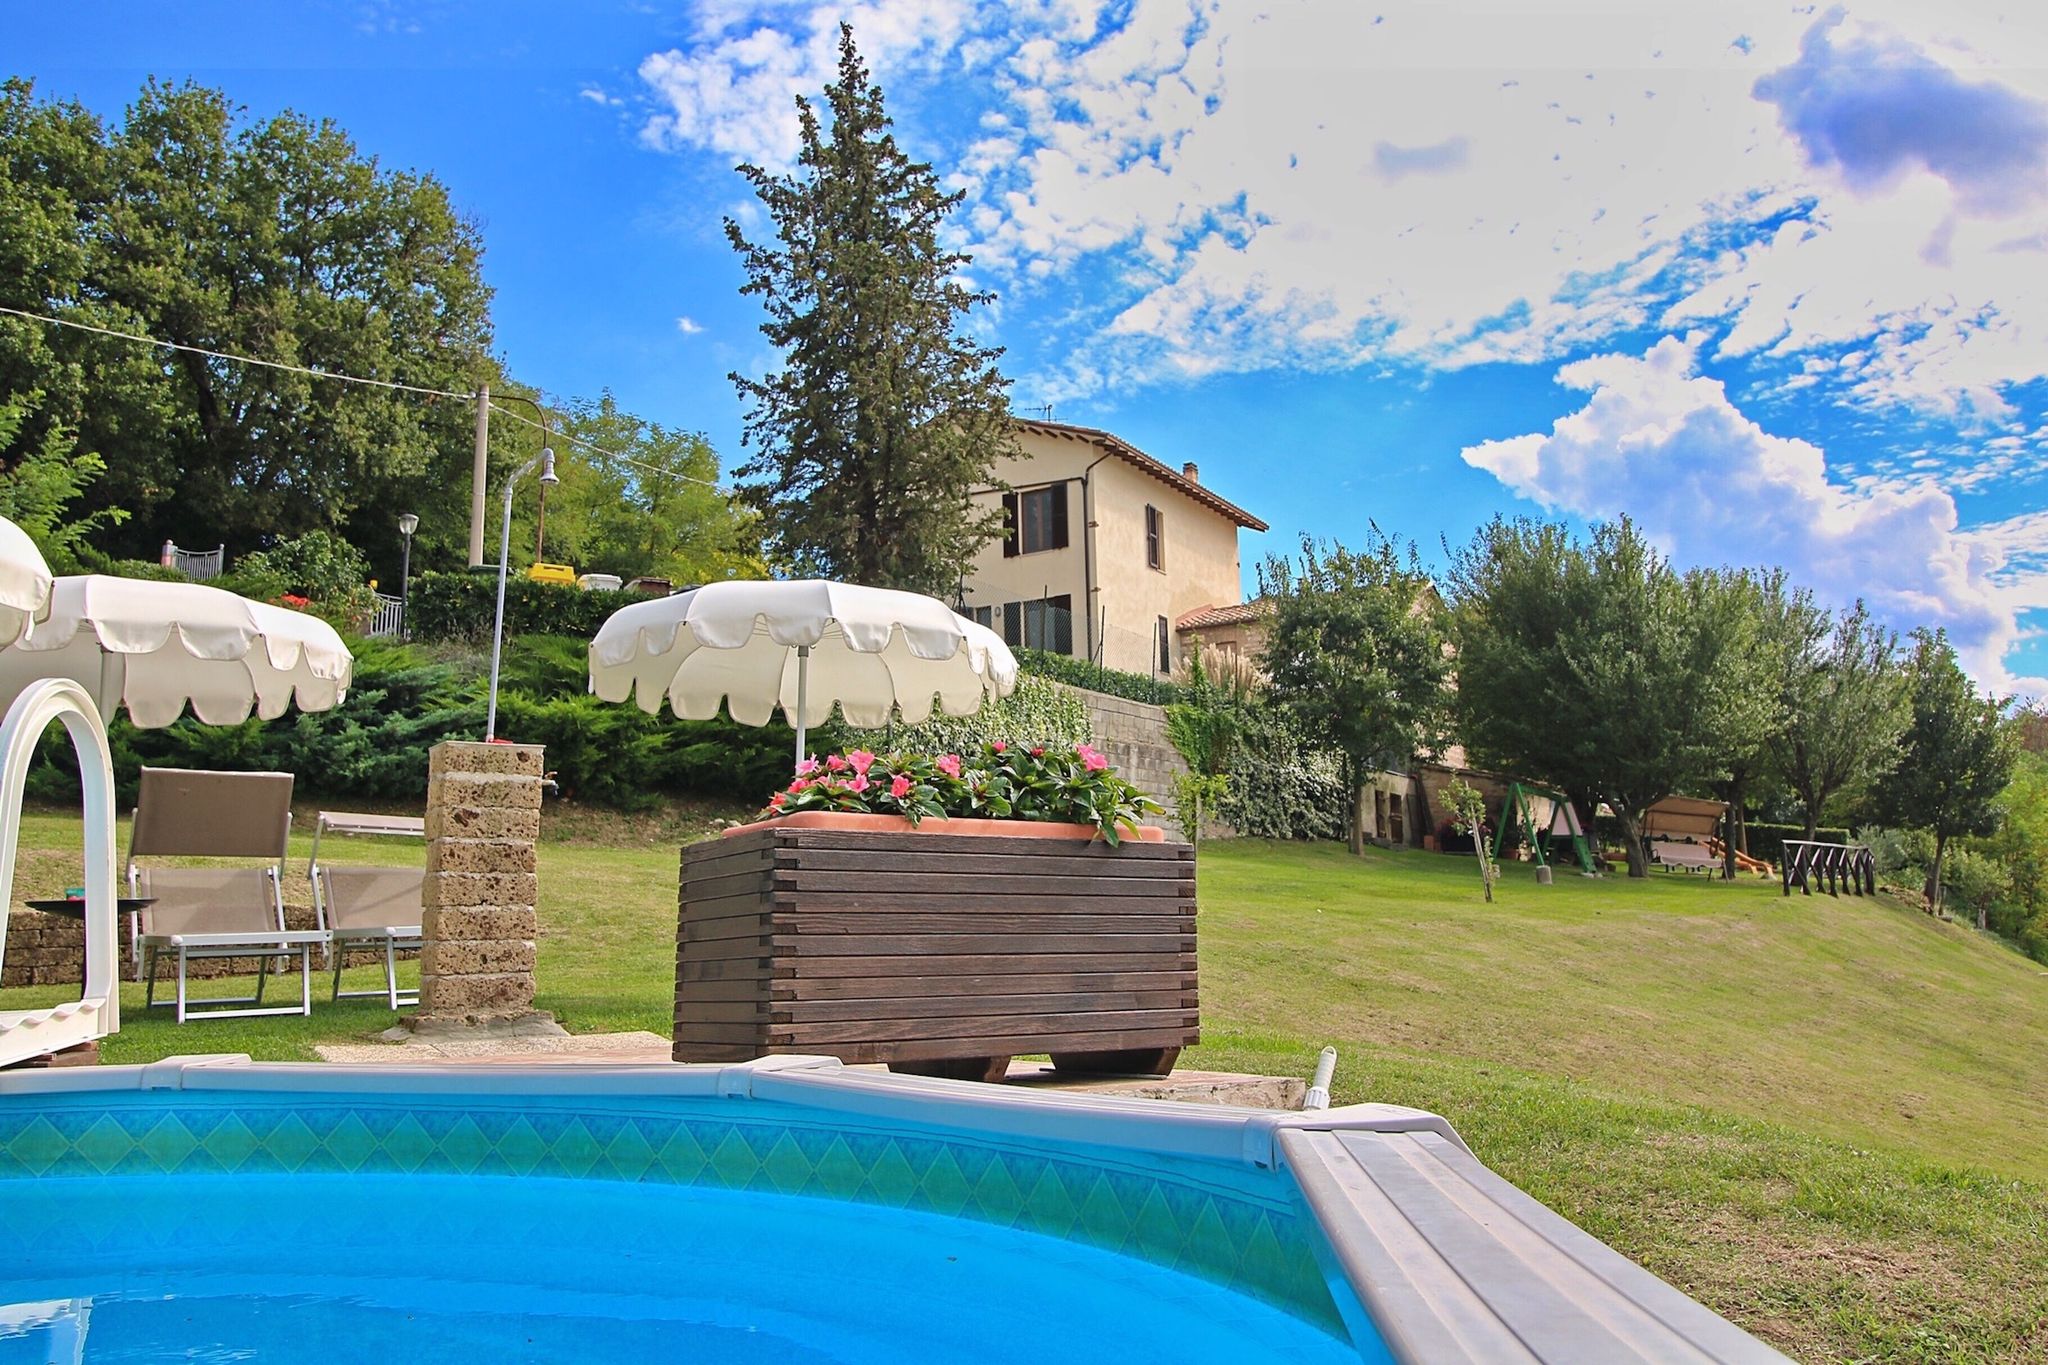 Villa in Piticchio with Swimming Pool, Garden, BBQ, Parking